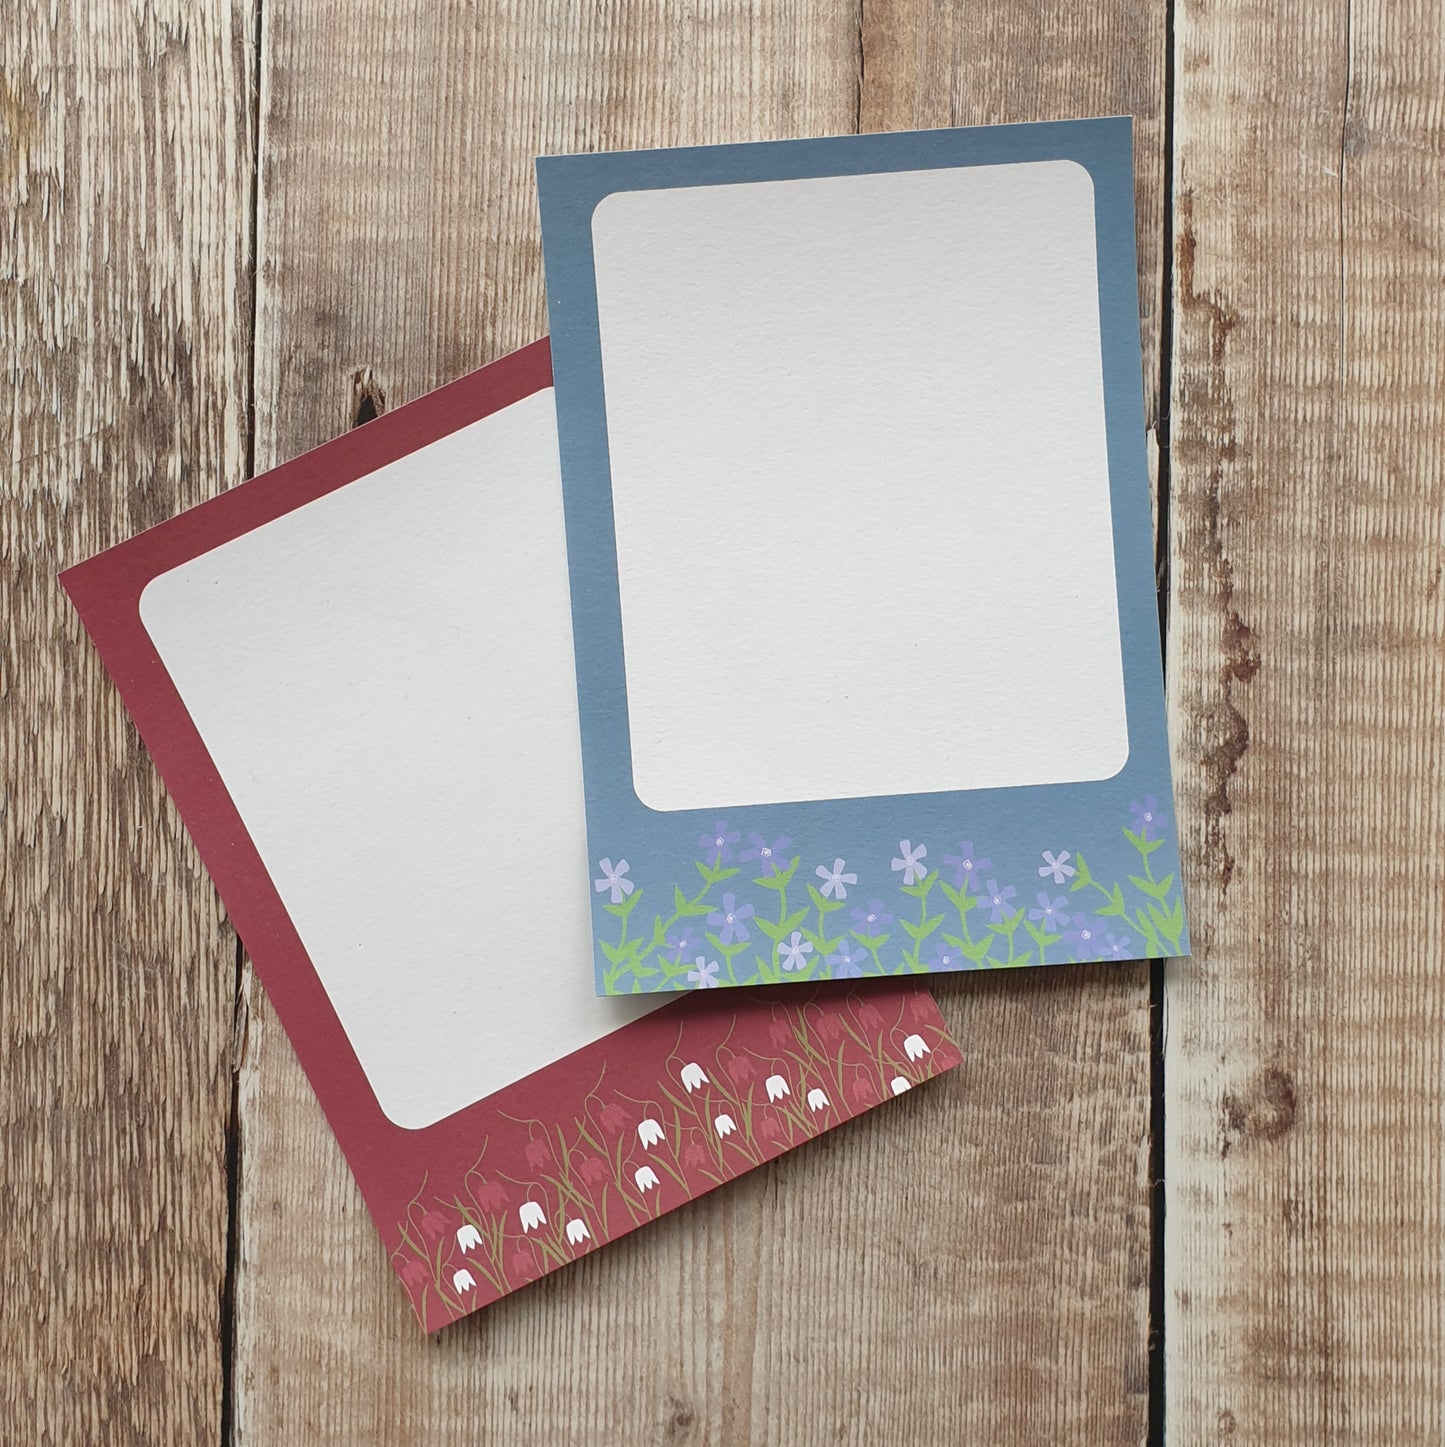 Periwinkle and Snakeshead Fritillary Gift Notes - Set of 4